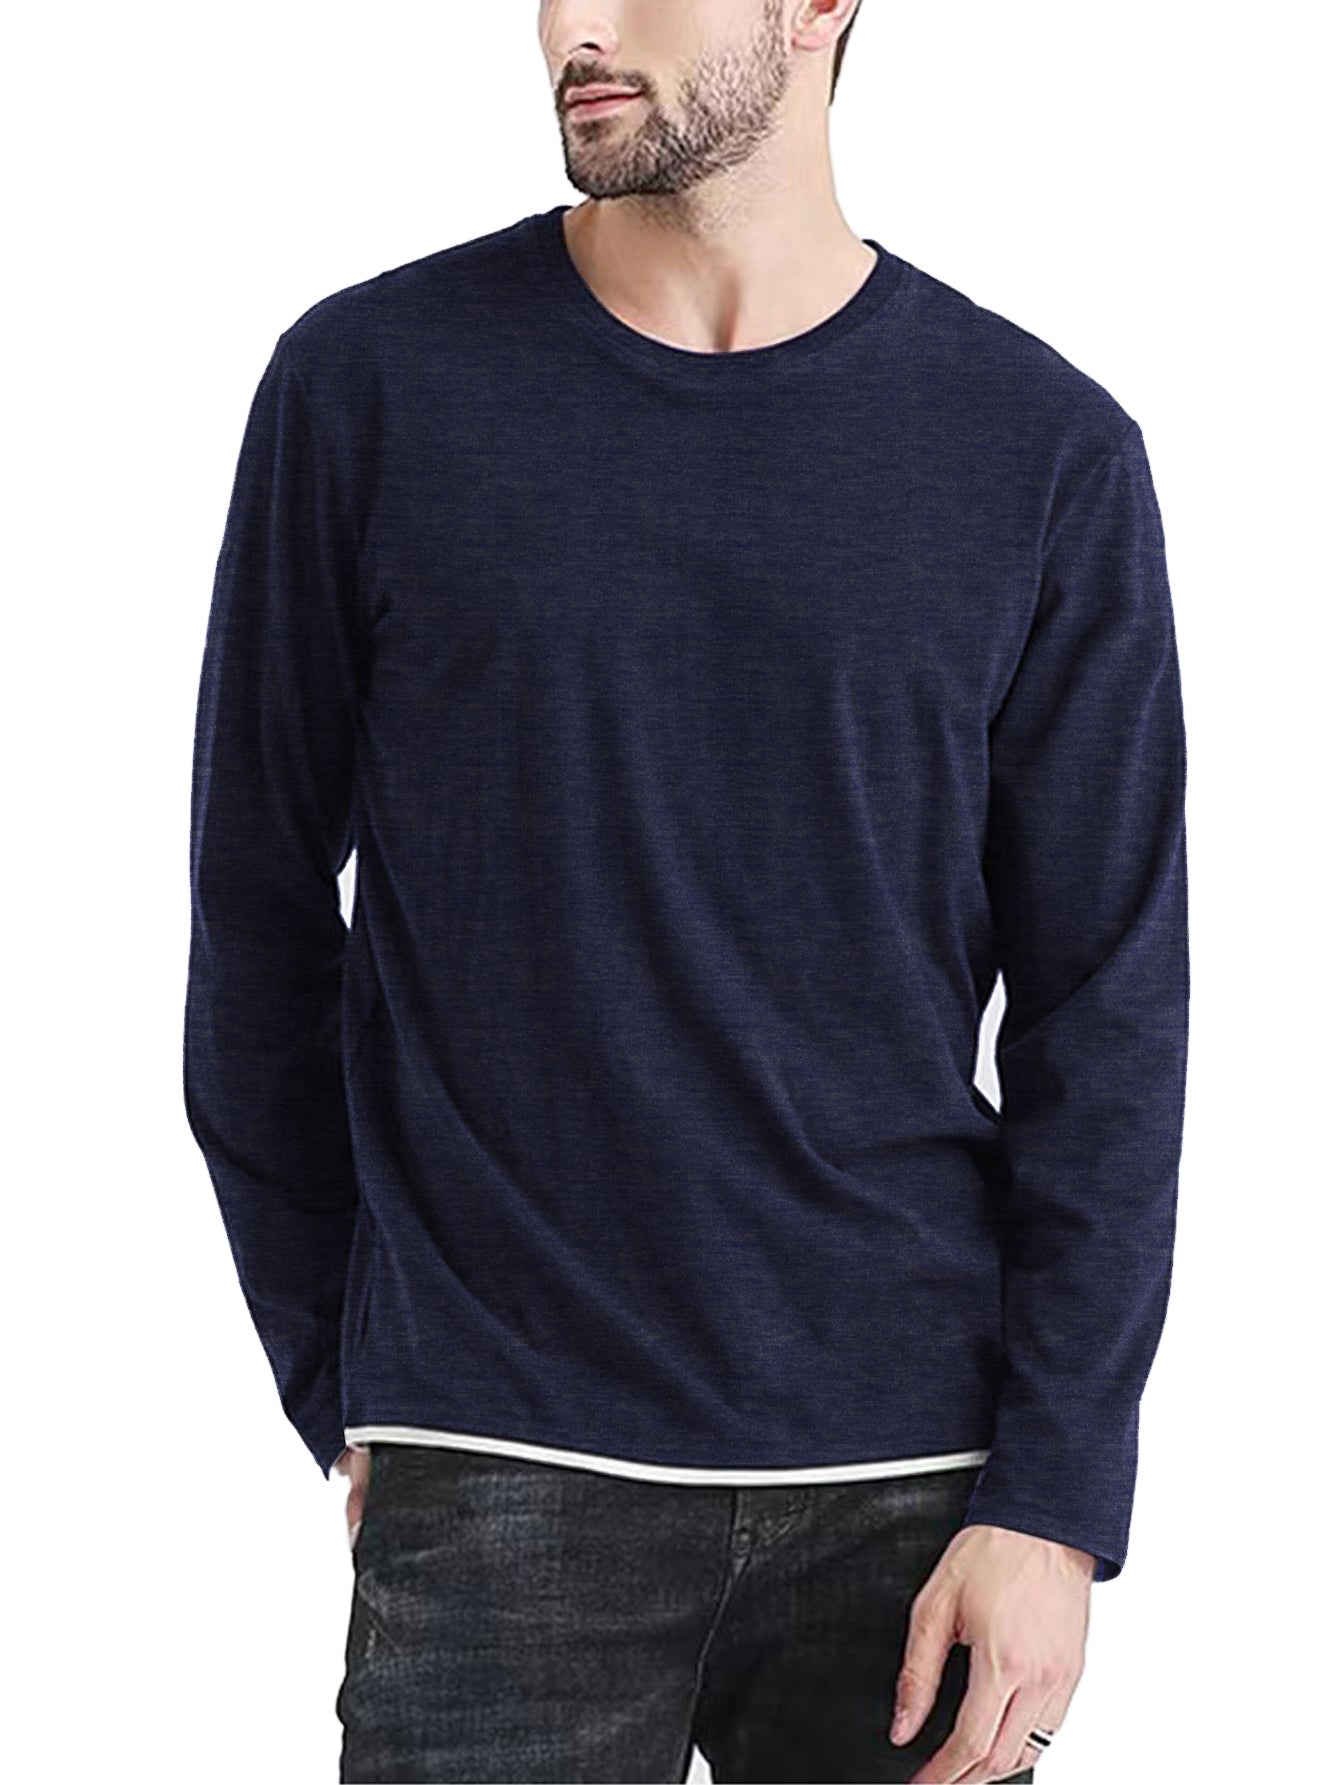 Aiyino Men's Long Sleeve Casual Crew Neck Soft Fitted T-Shirt S - 5XL